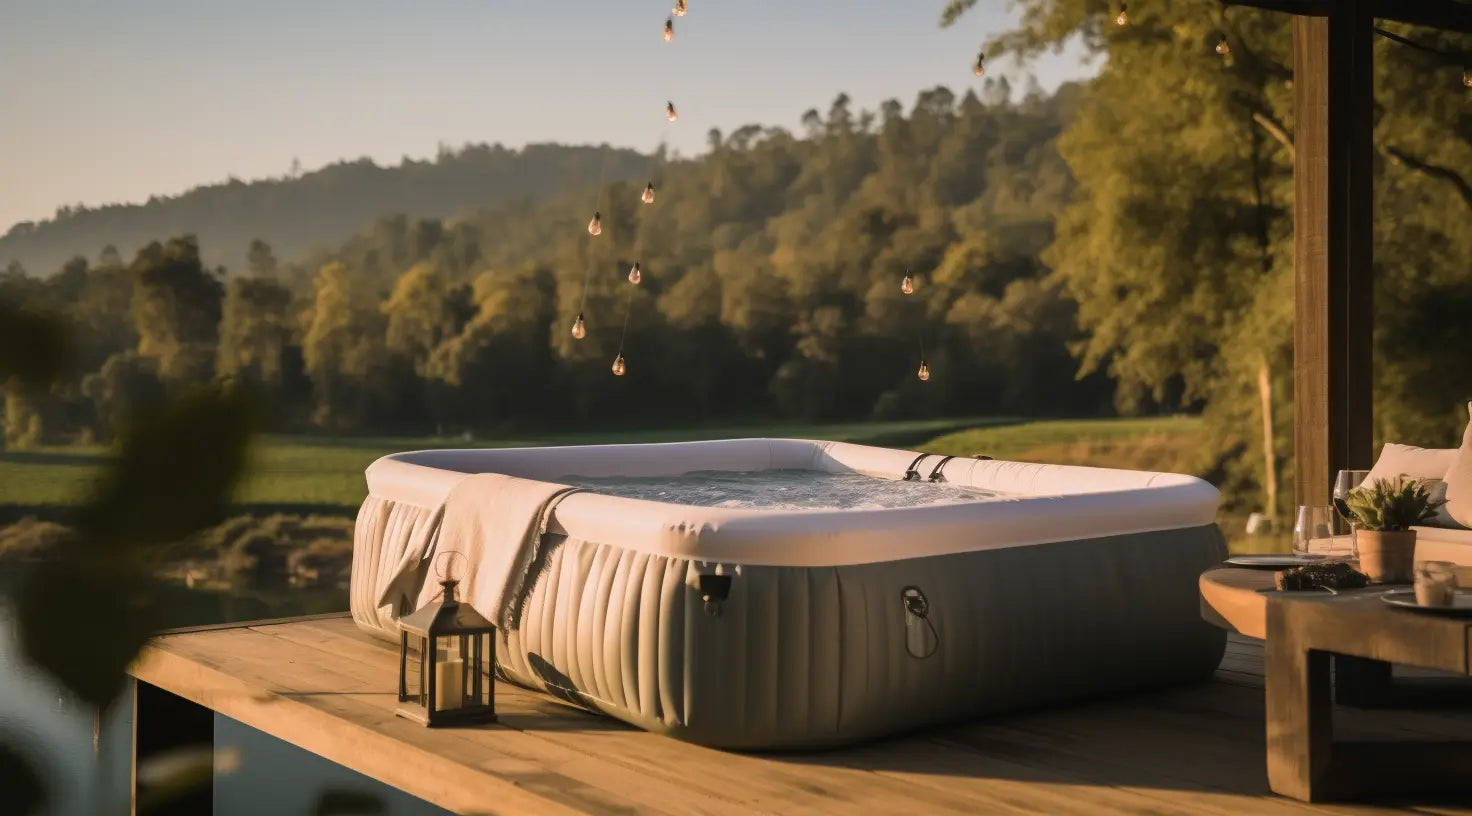 Essential Features to Consider When Buying an Inflatable Hot Tub